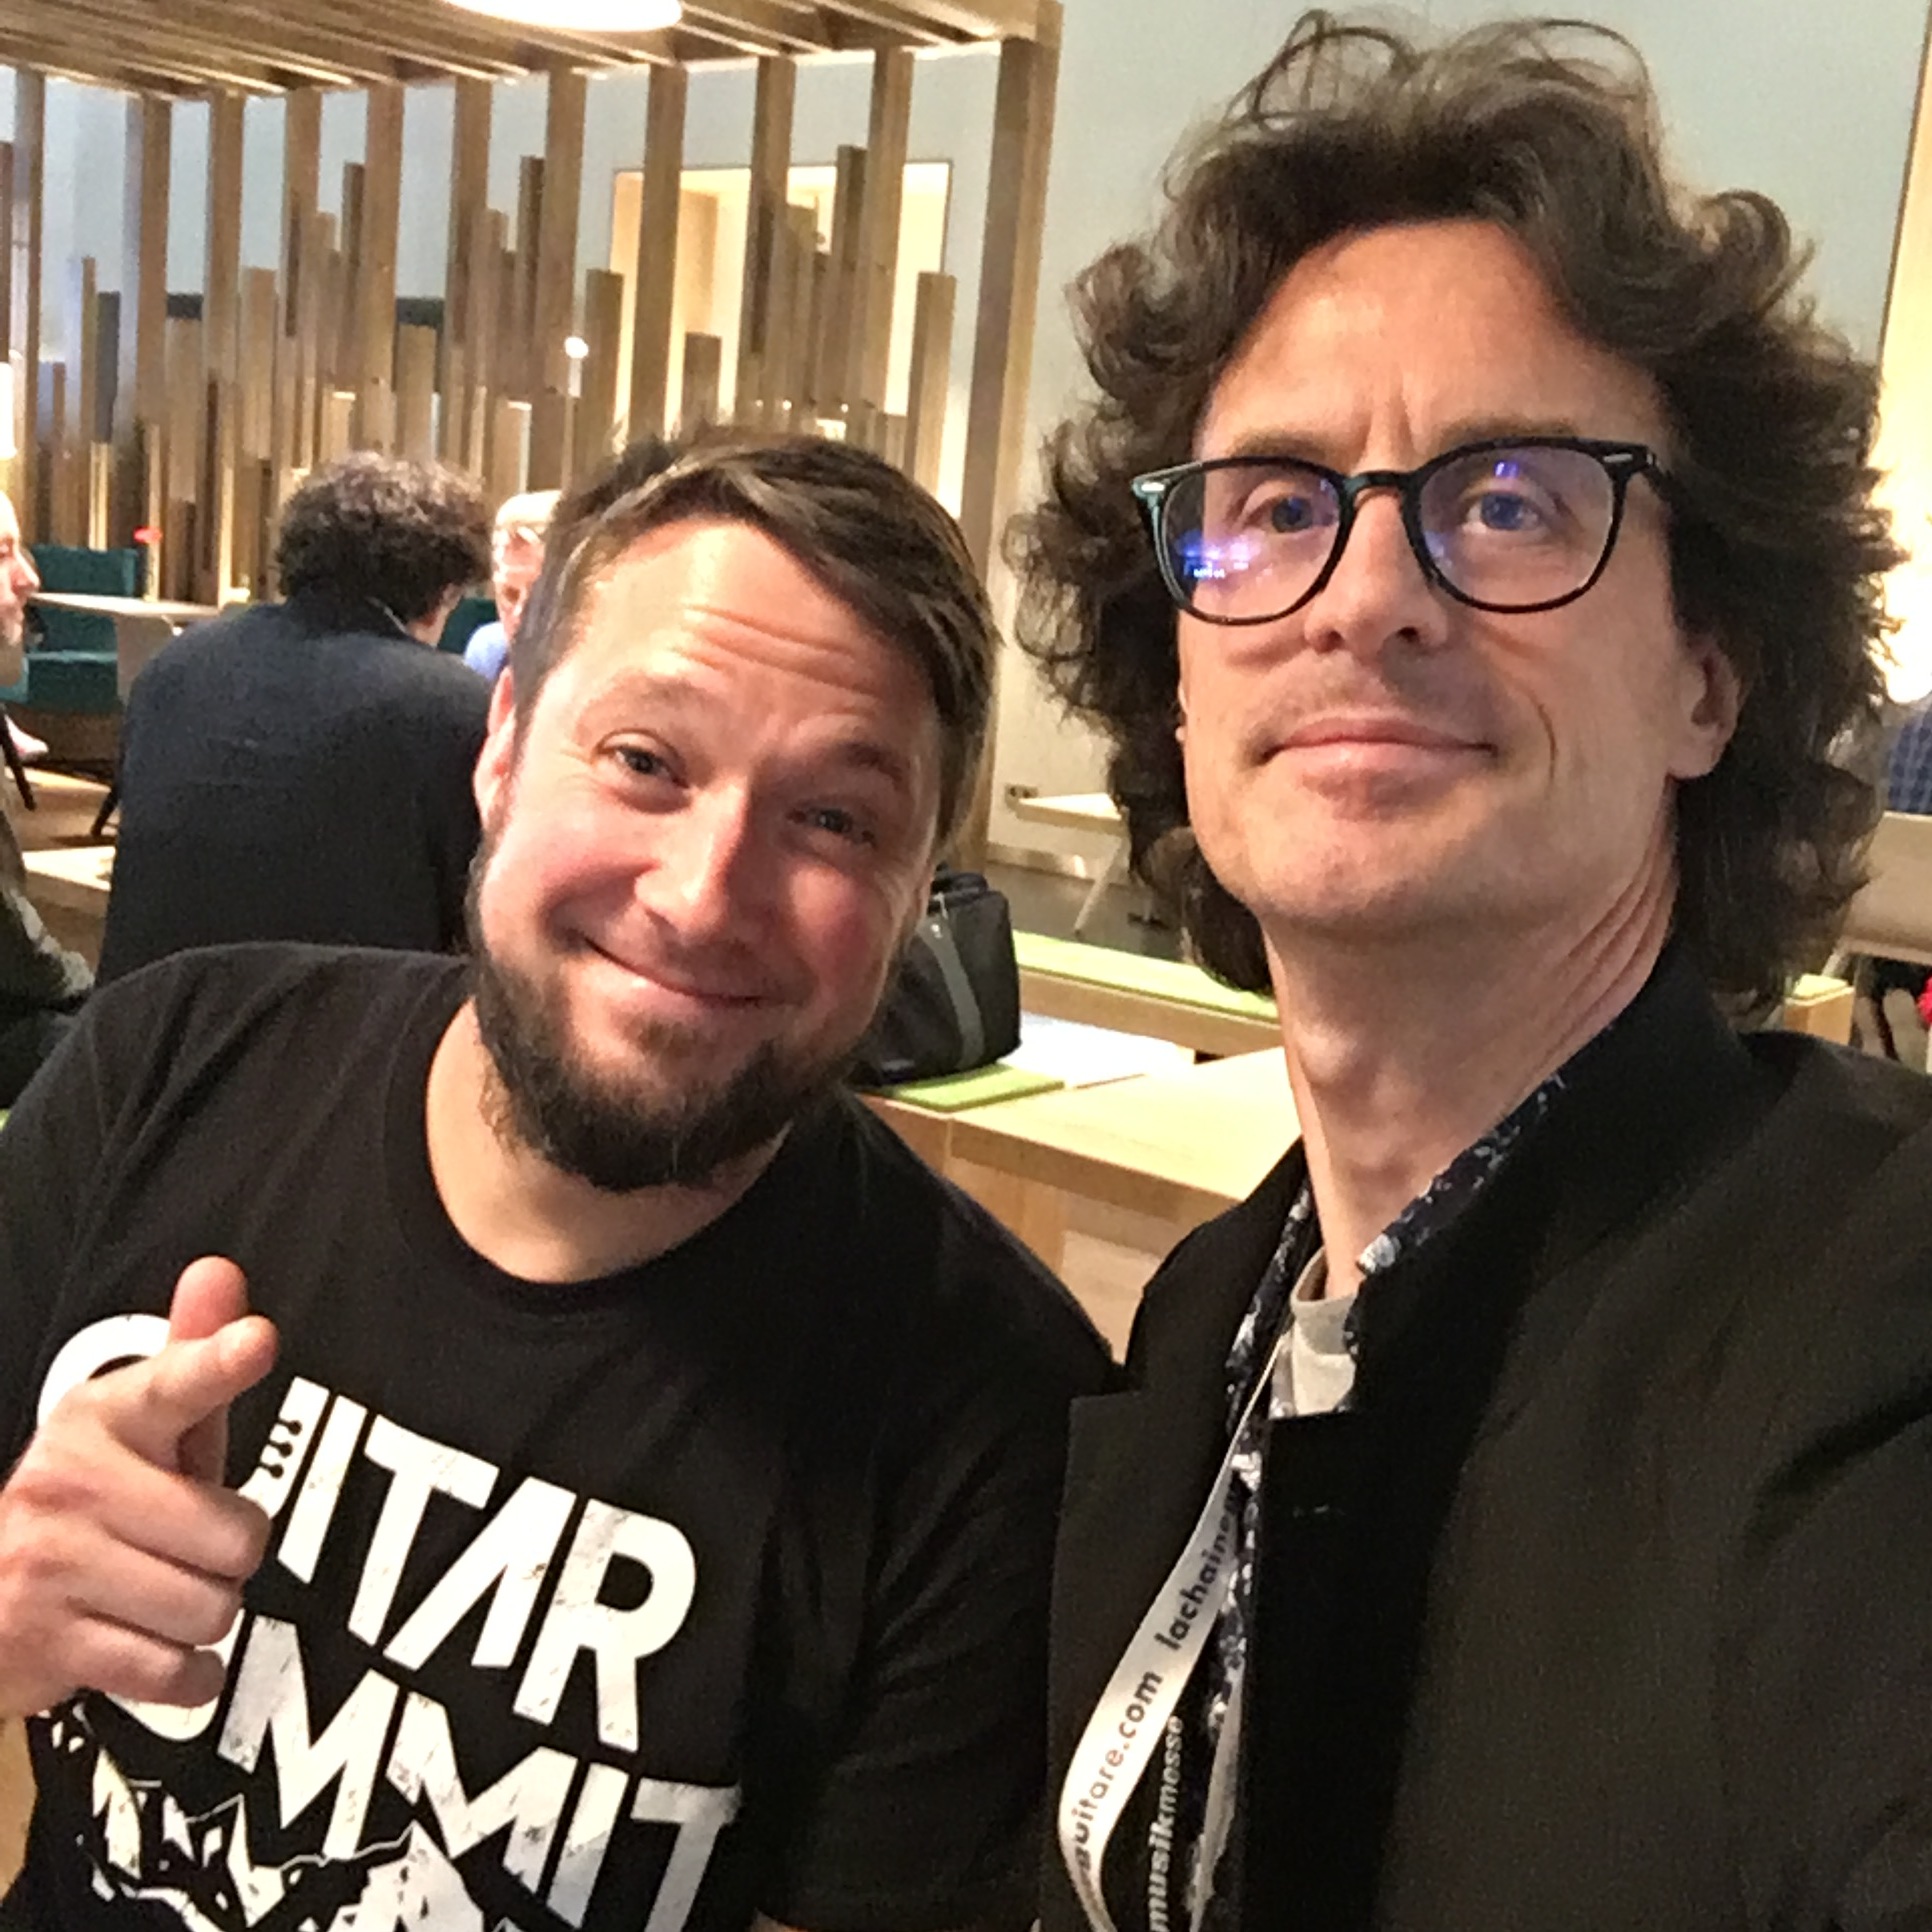 2018 Guitar Summit - Preview of the 2nd edition in an interview